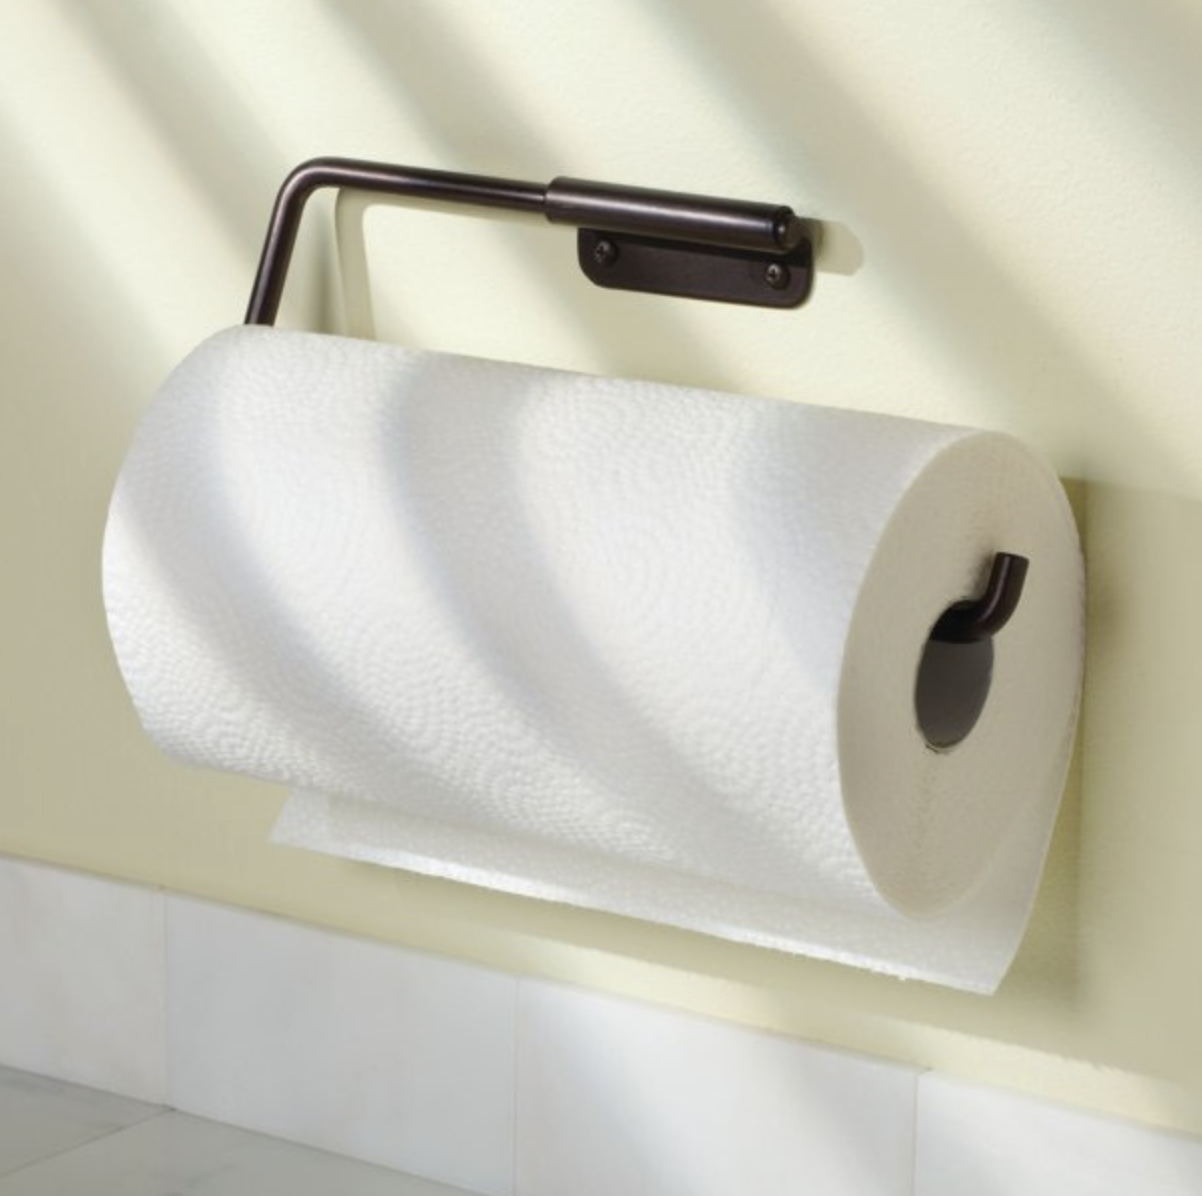 The Best Paper Towel Holders in 2022